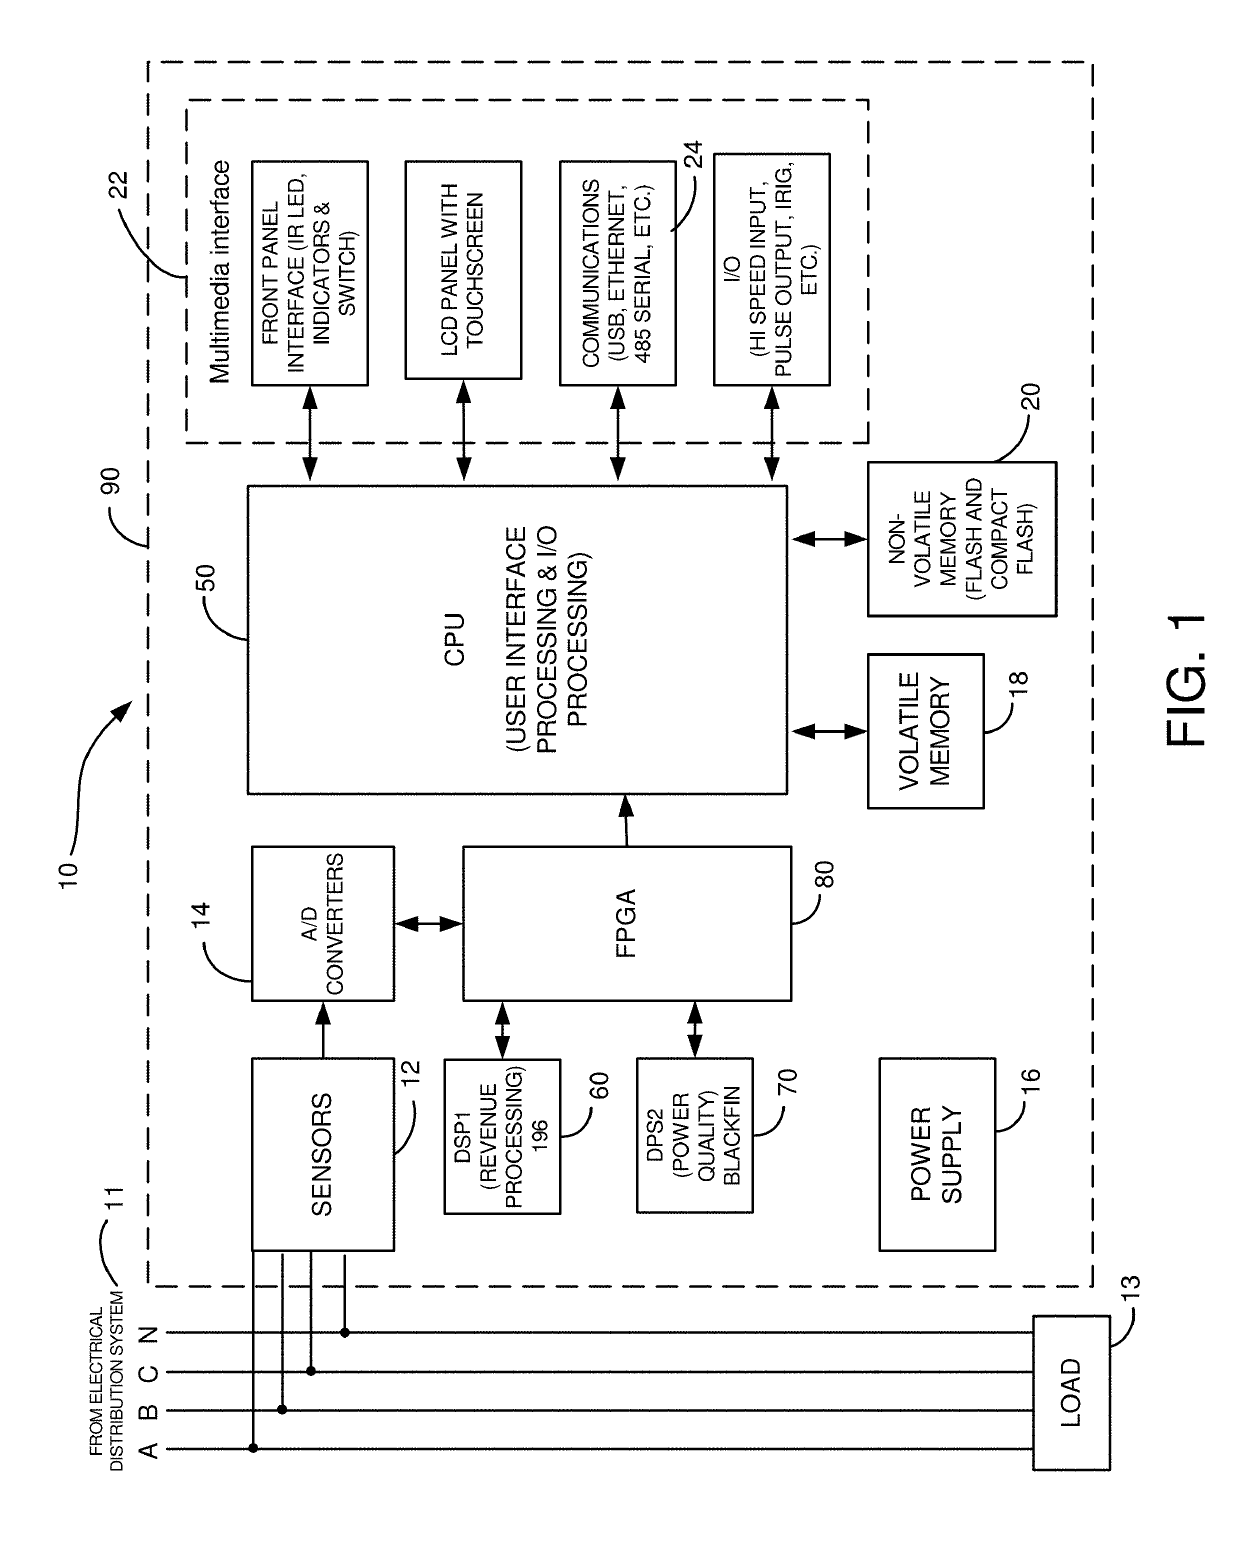 Devices, systems and methods for the collection of meter data in a common, globally accessible, group of servers, to provide simpler configuration, collection, viewing, and analysis of the meter data